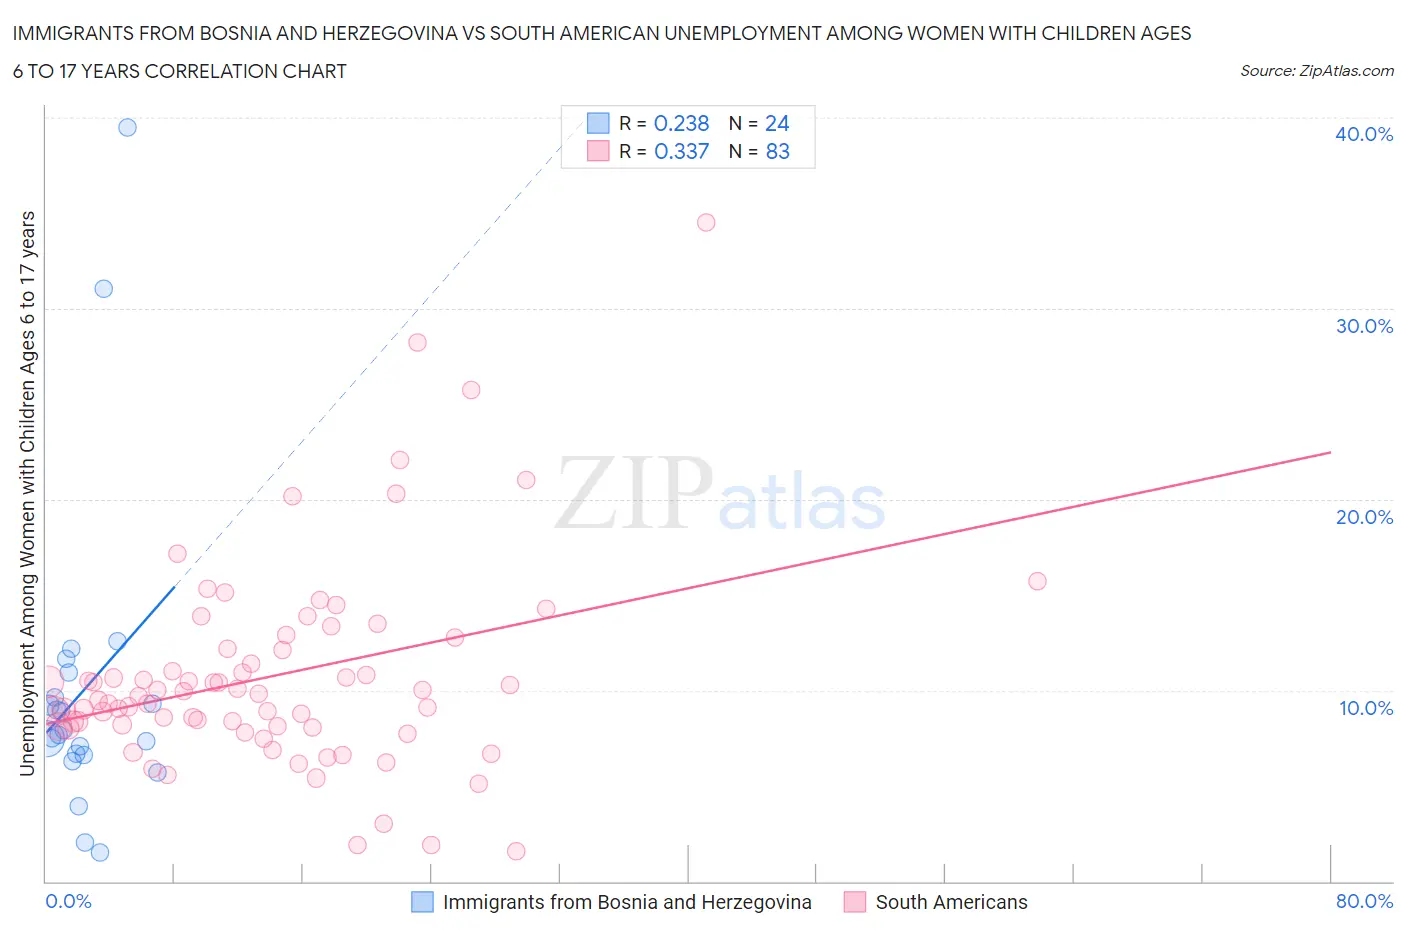 Immigrants from Bosnia and Herzegovina vs South American Unemployment Among Women with Children Ages 6 to 17 years